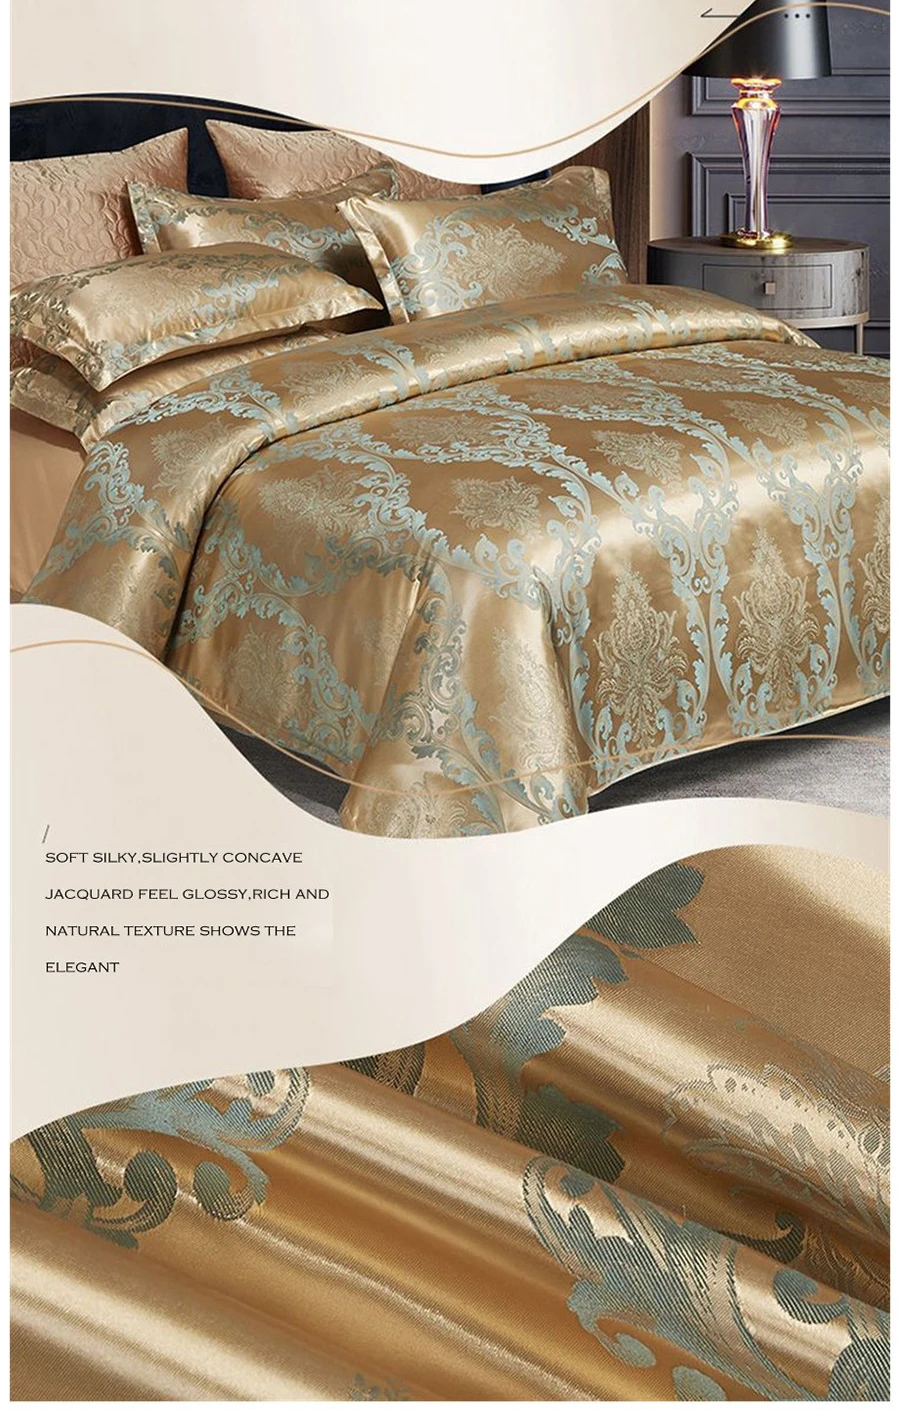 European Luxury Satin Rayon Jacquard Duvet Cover 220x240 2 People Double Bed Quilt Cover Bedding Set Queen King Size Comforter